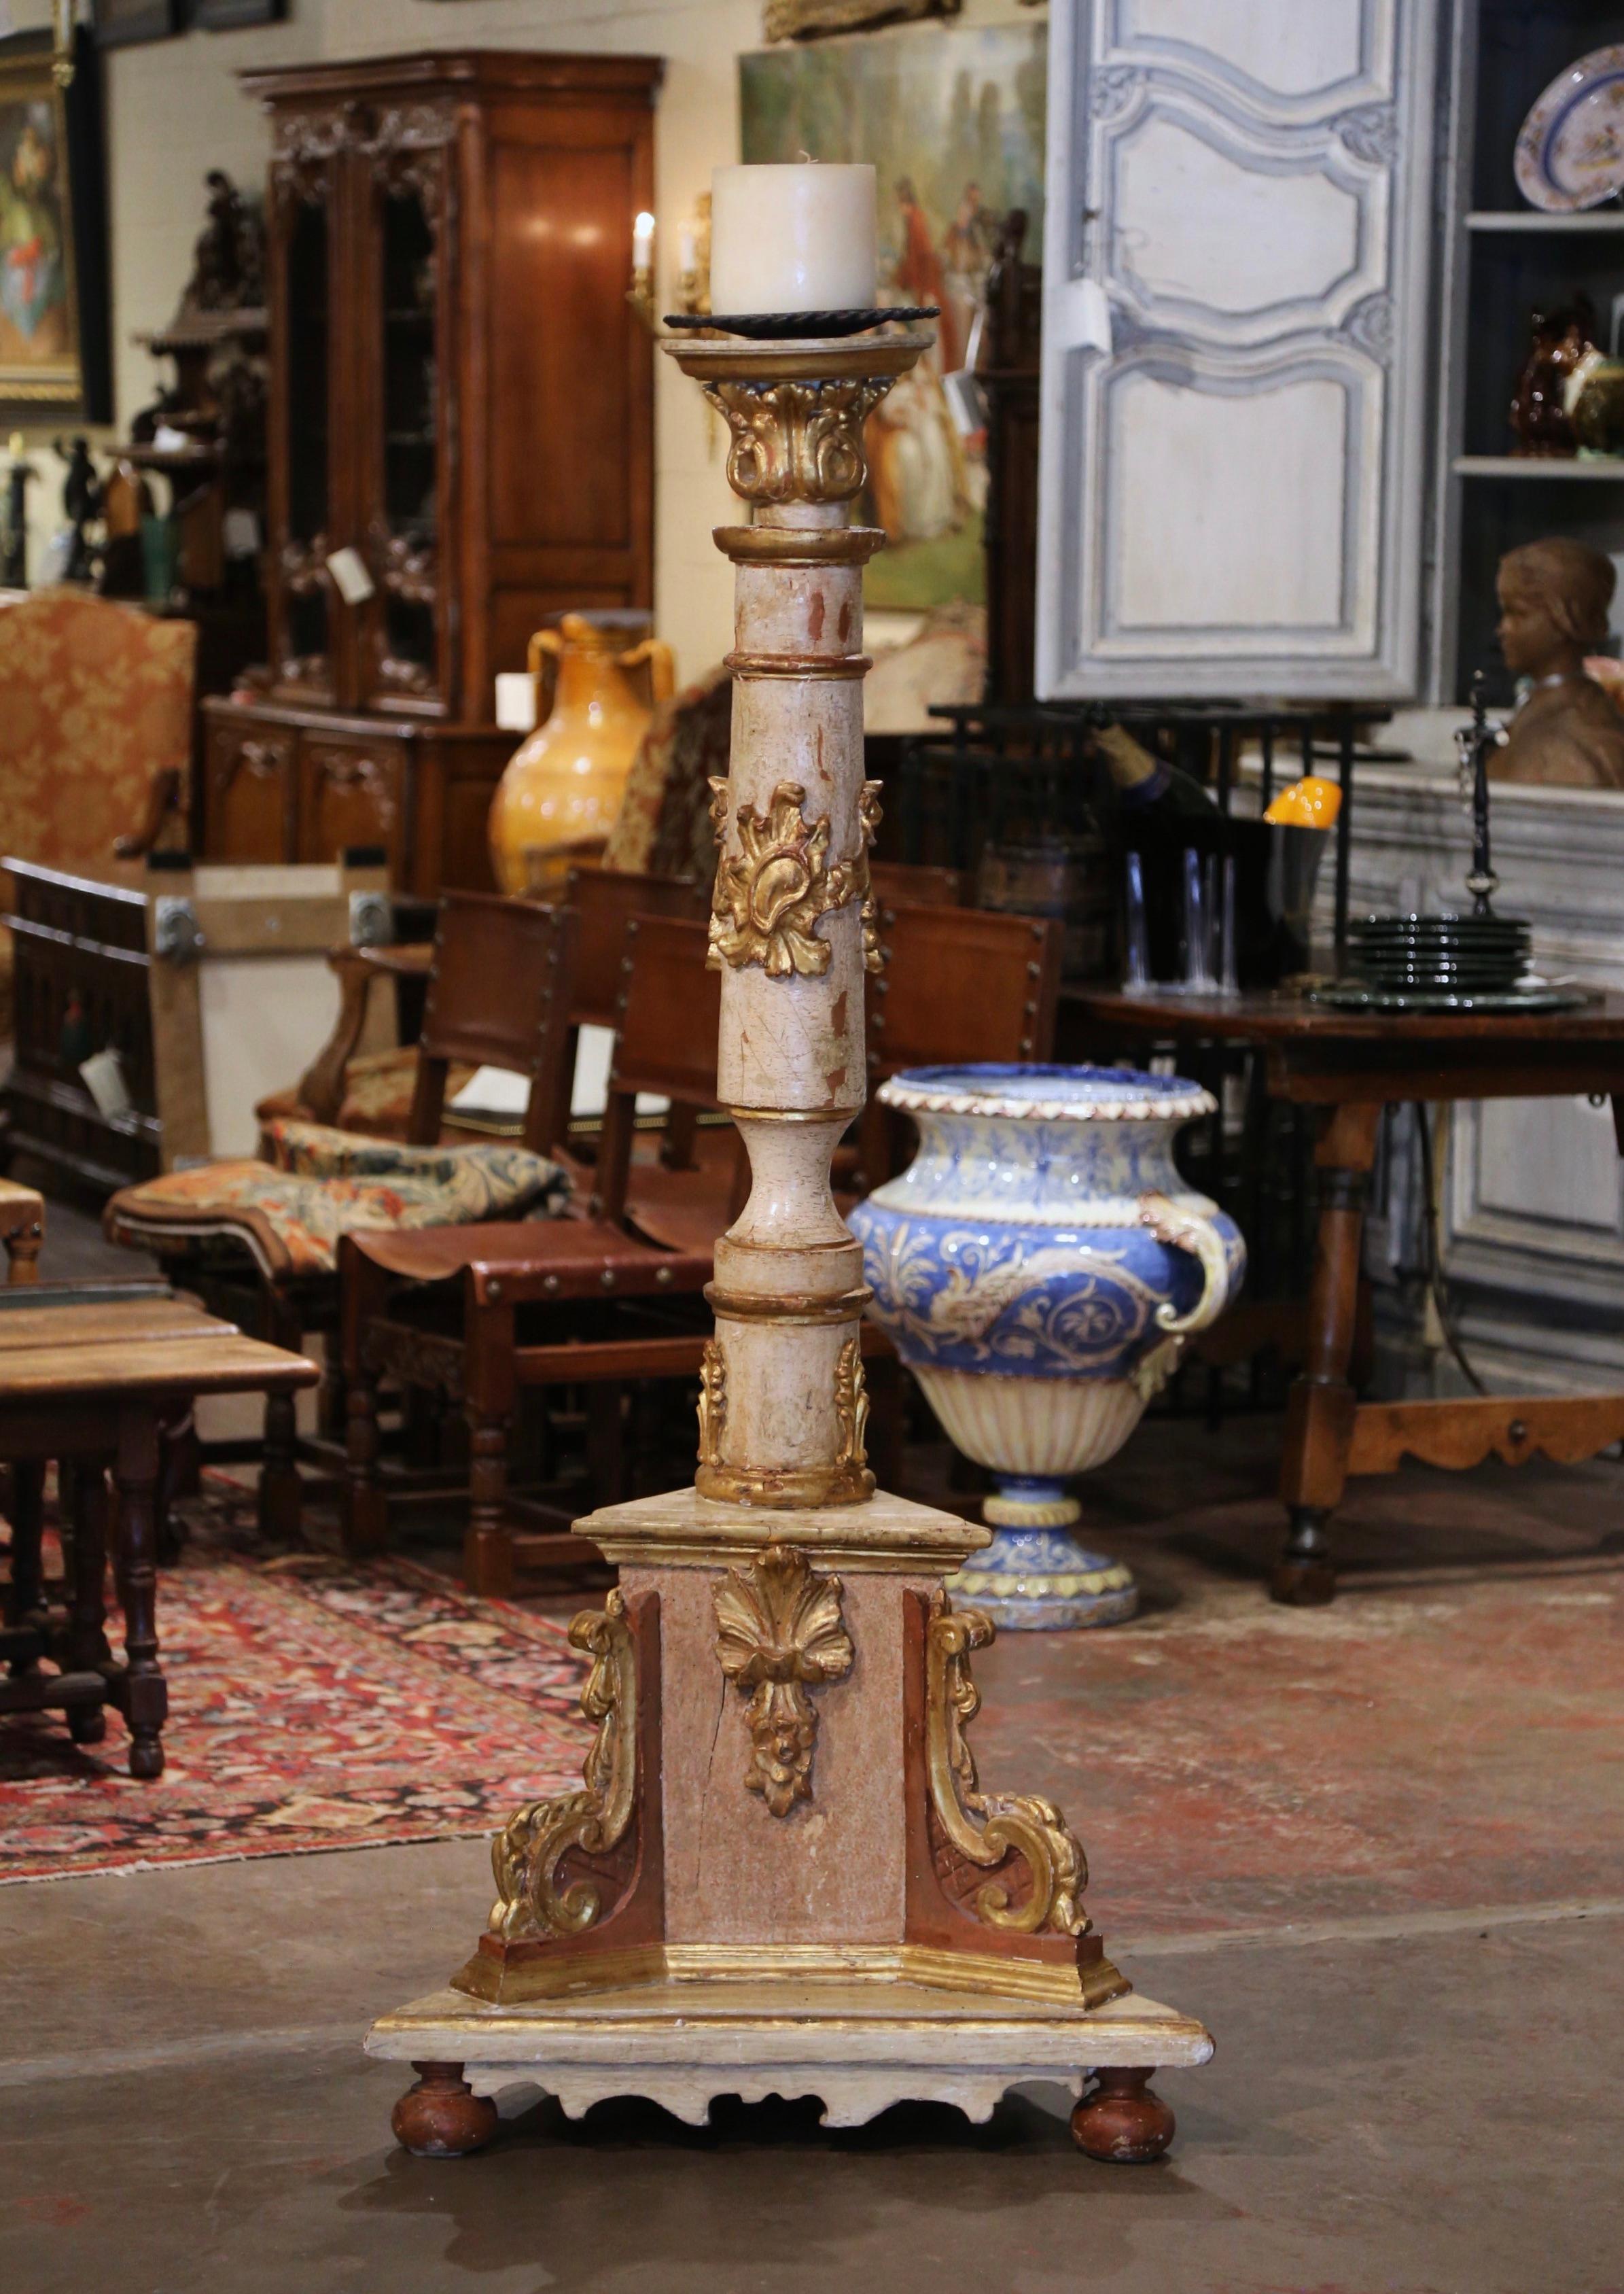 Mid-19th Century Italian Carved Polychrome and Gilt Candle Holder Floor Lamp In Excellent Condition For Sale In Dallas, TX